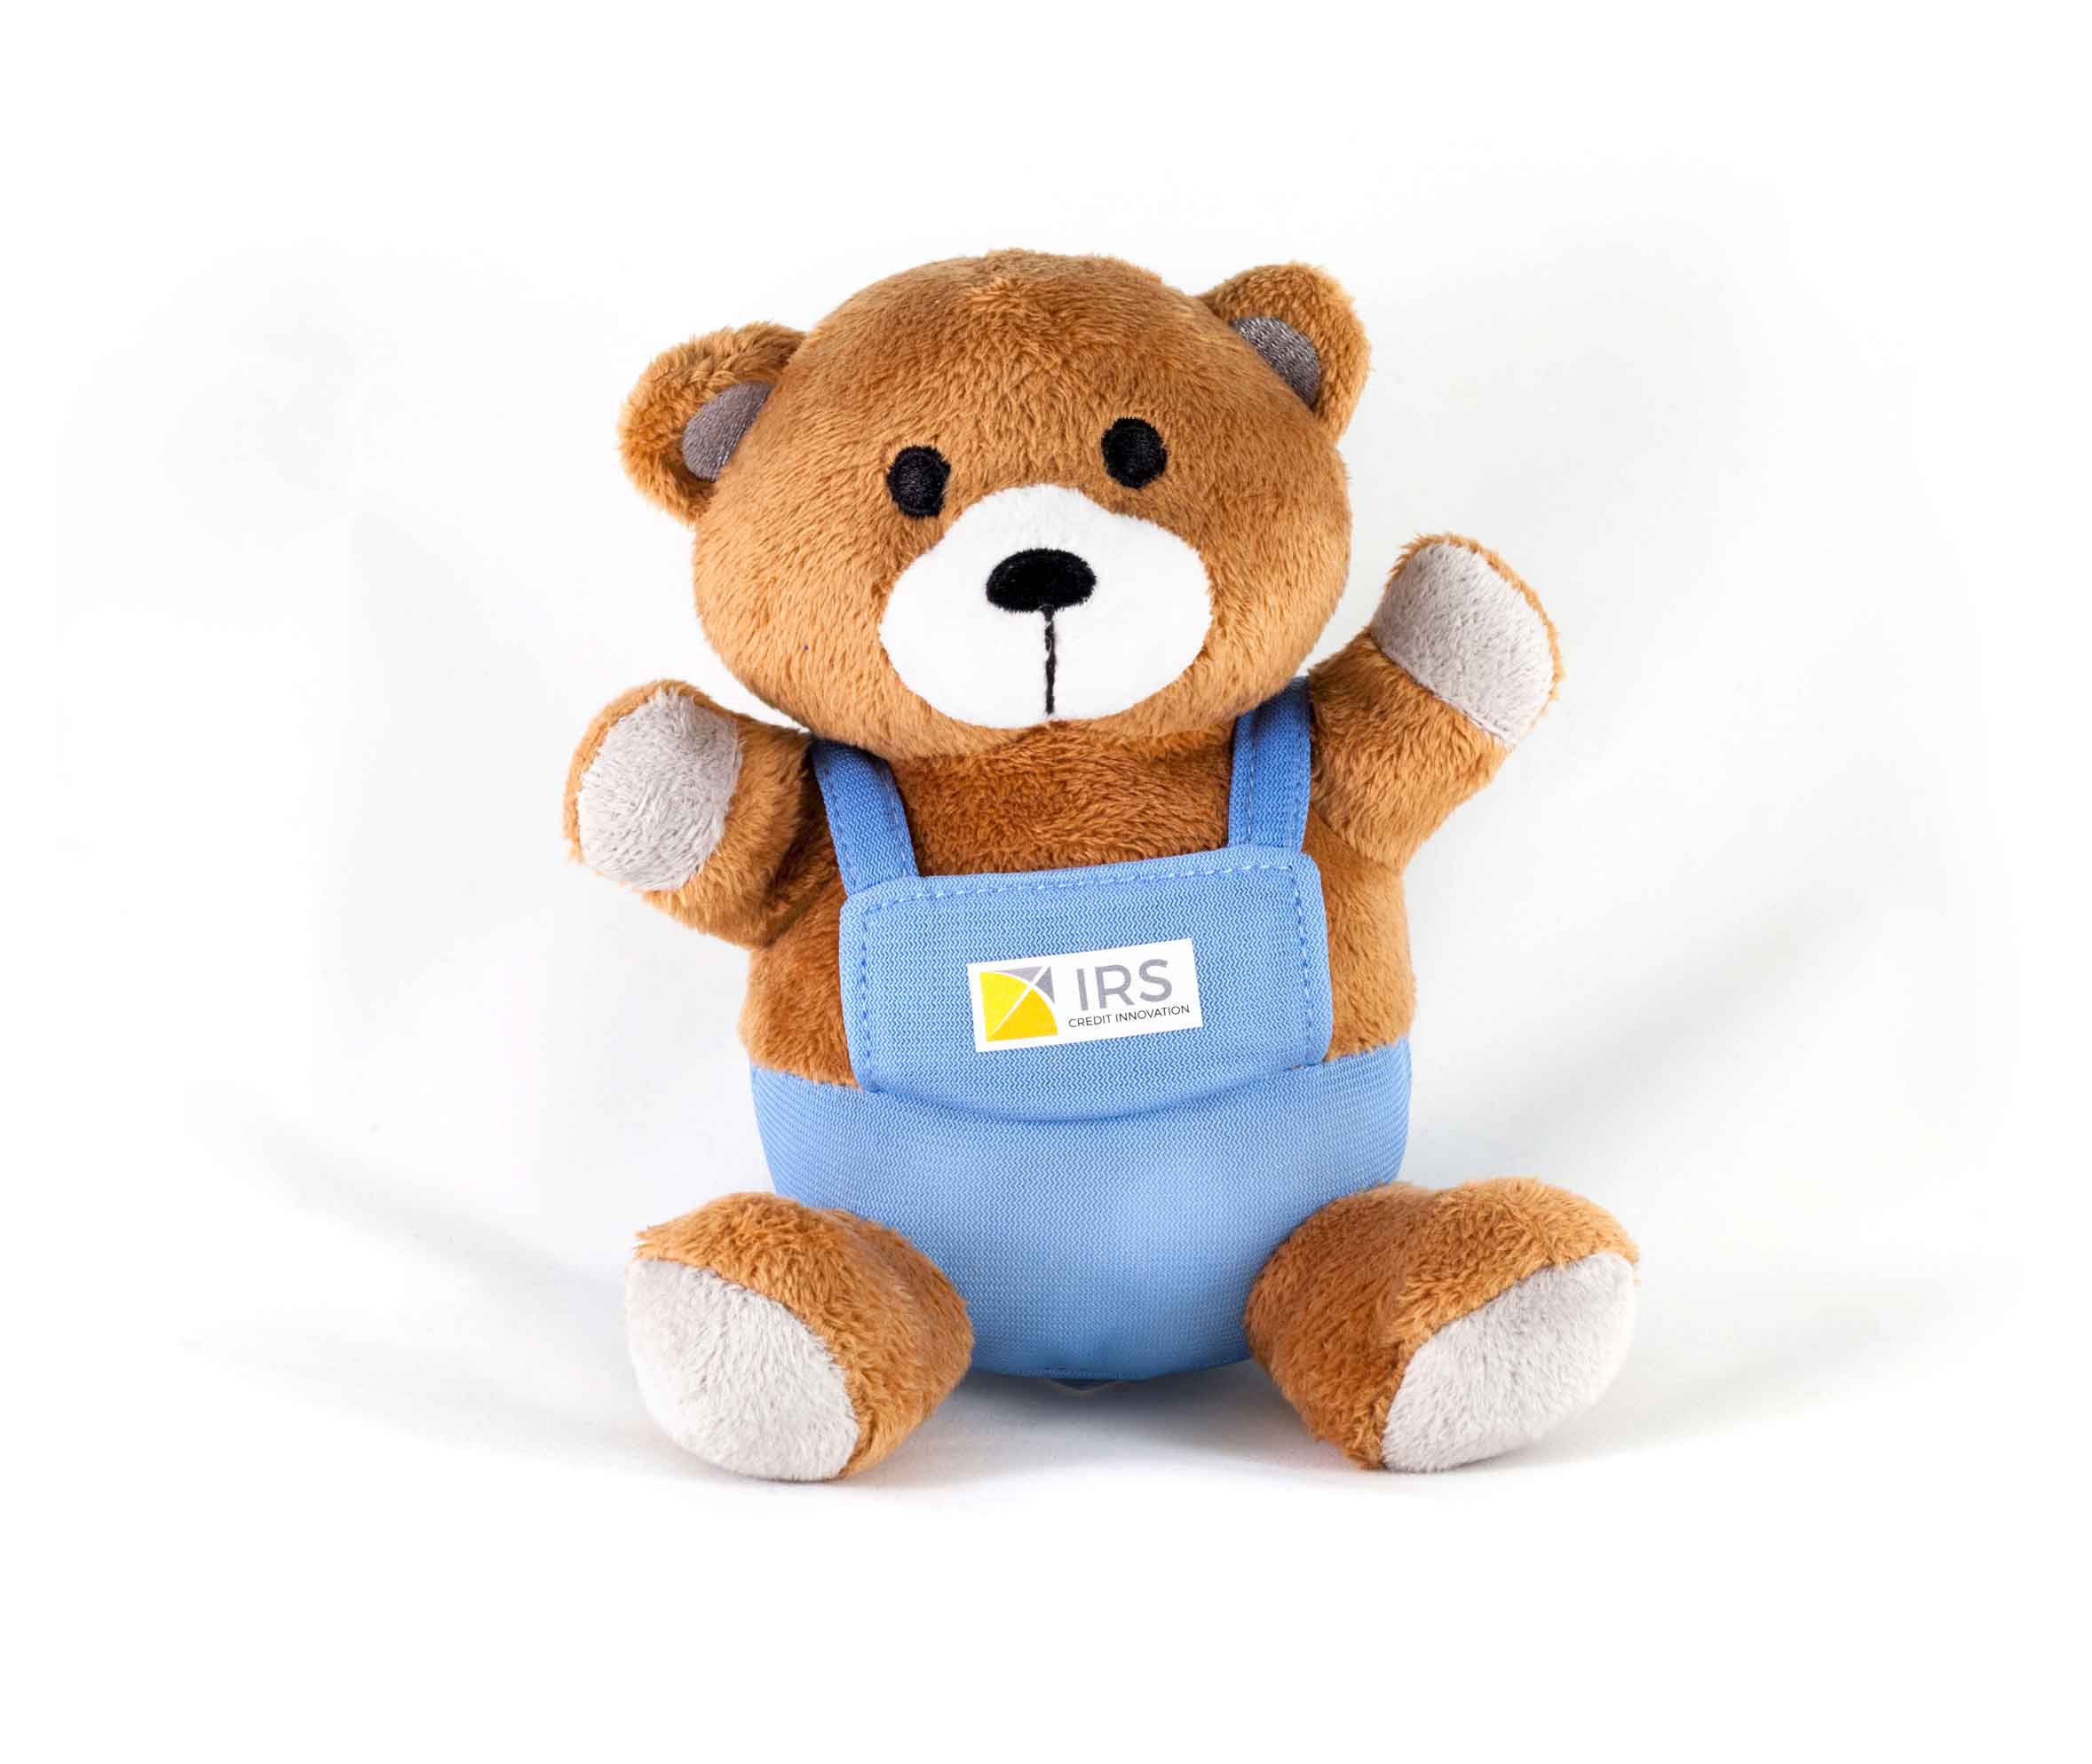 Peluche Personalizzato - IRS Credit Innovation - Stocchi Advertising